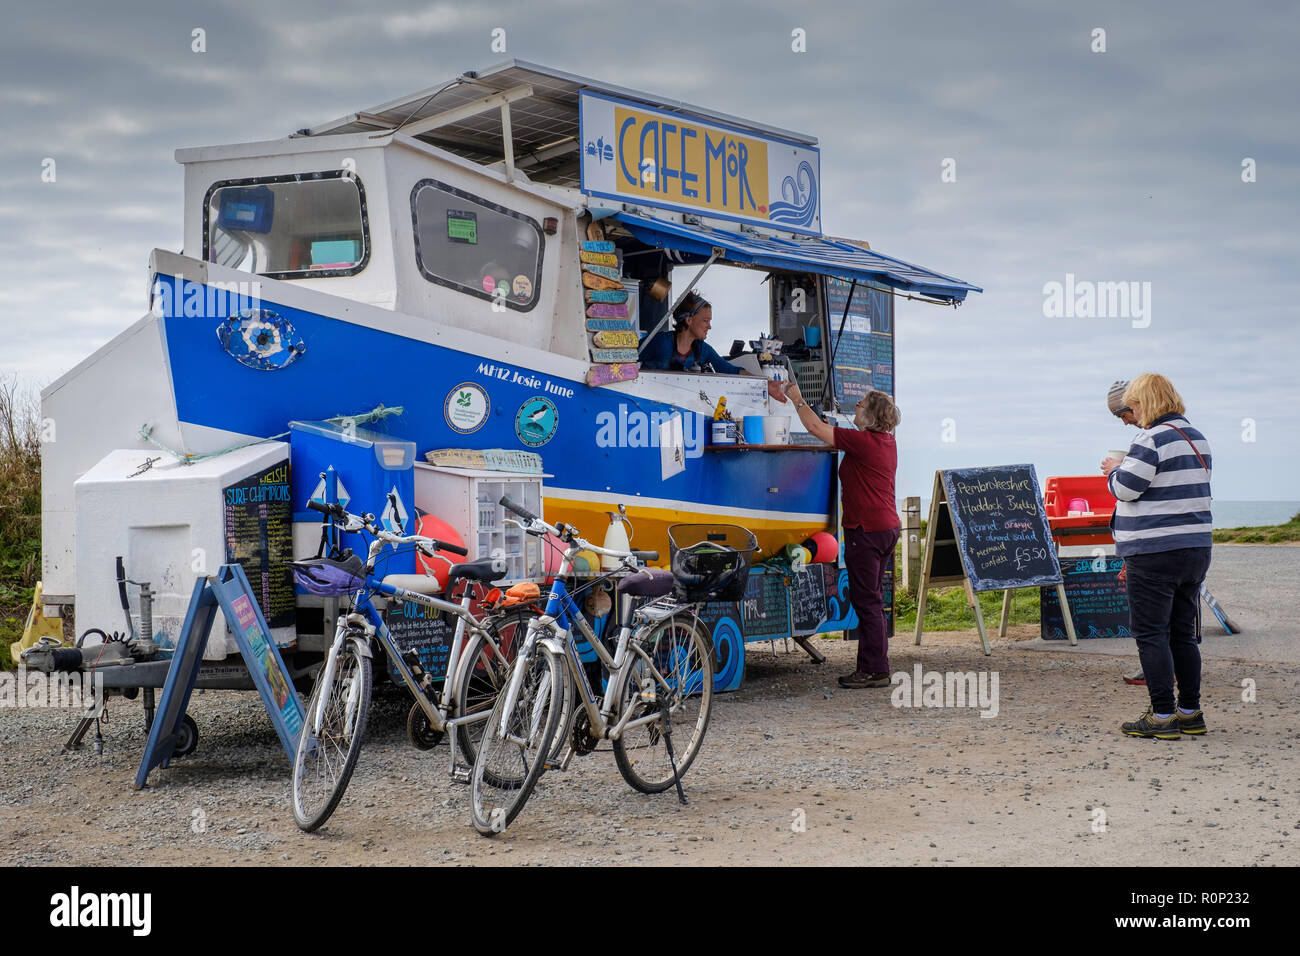 MOBILE FOOD STALL AT SEA SIDE PEMBROKESHIRE Stock Photo